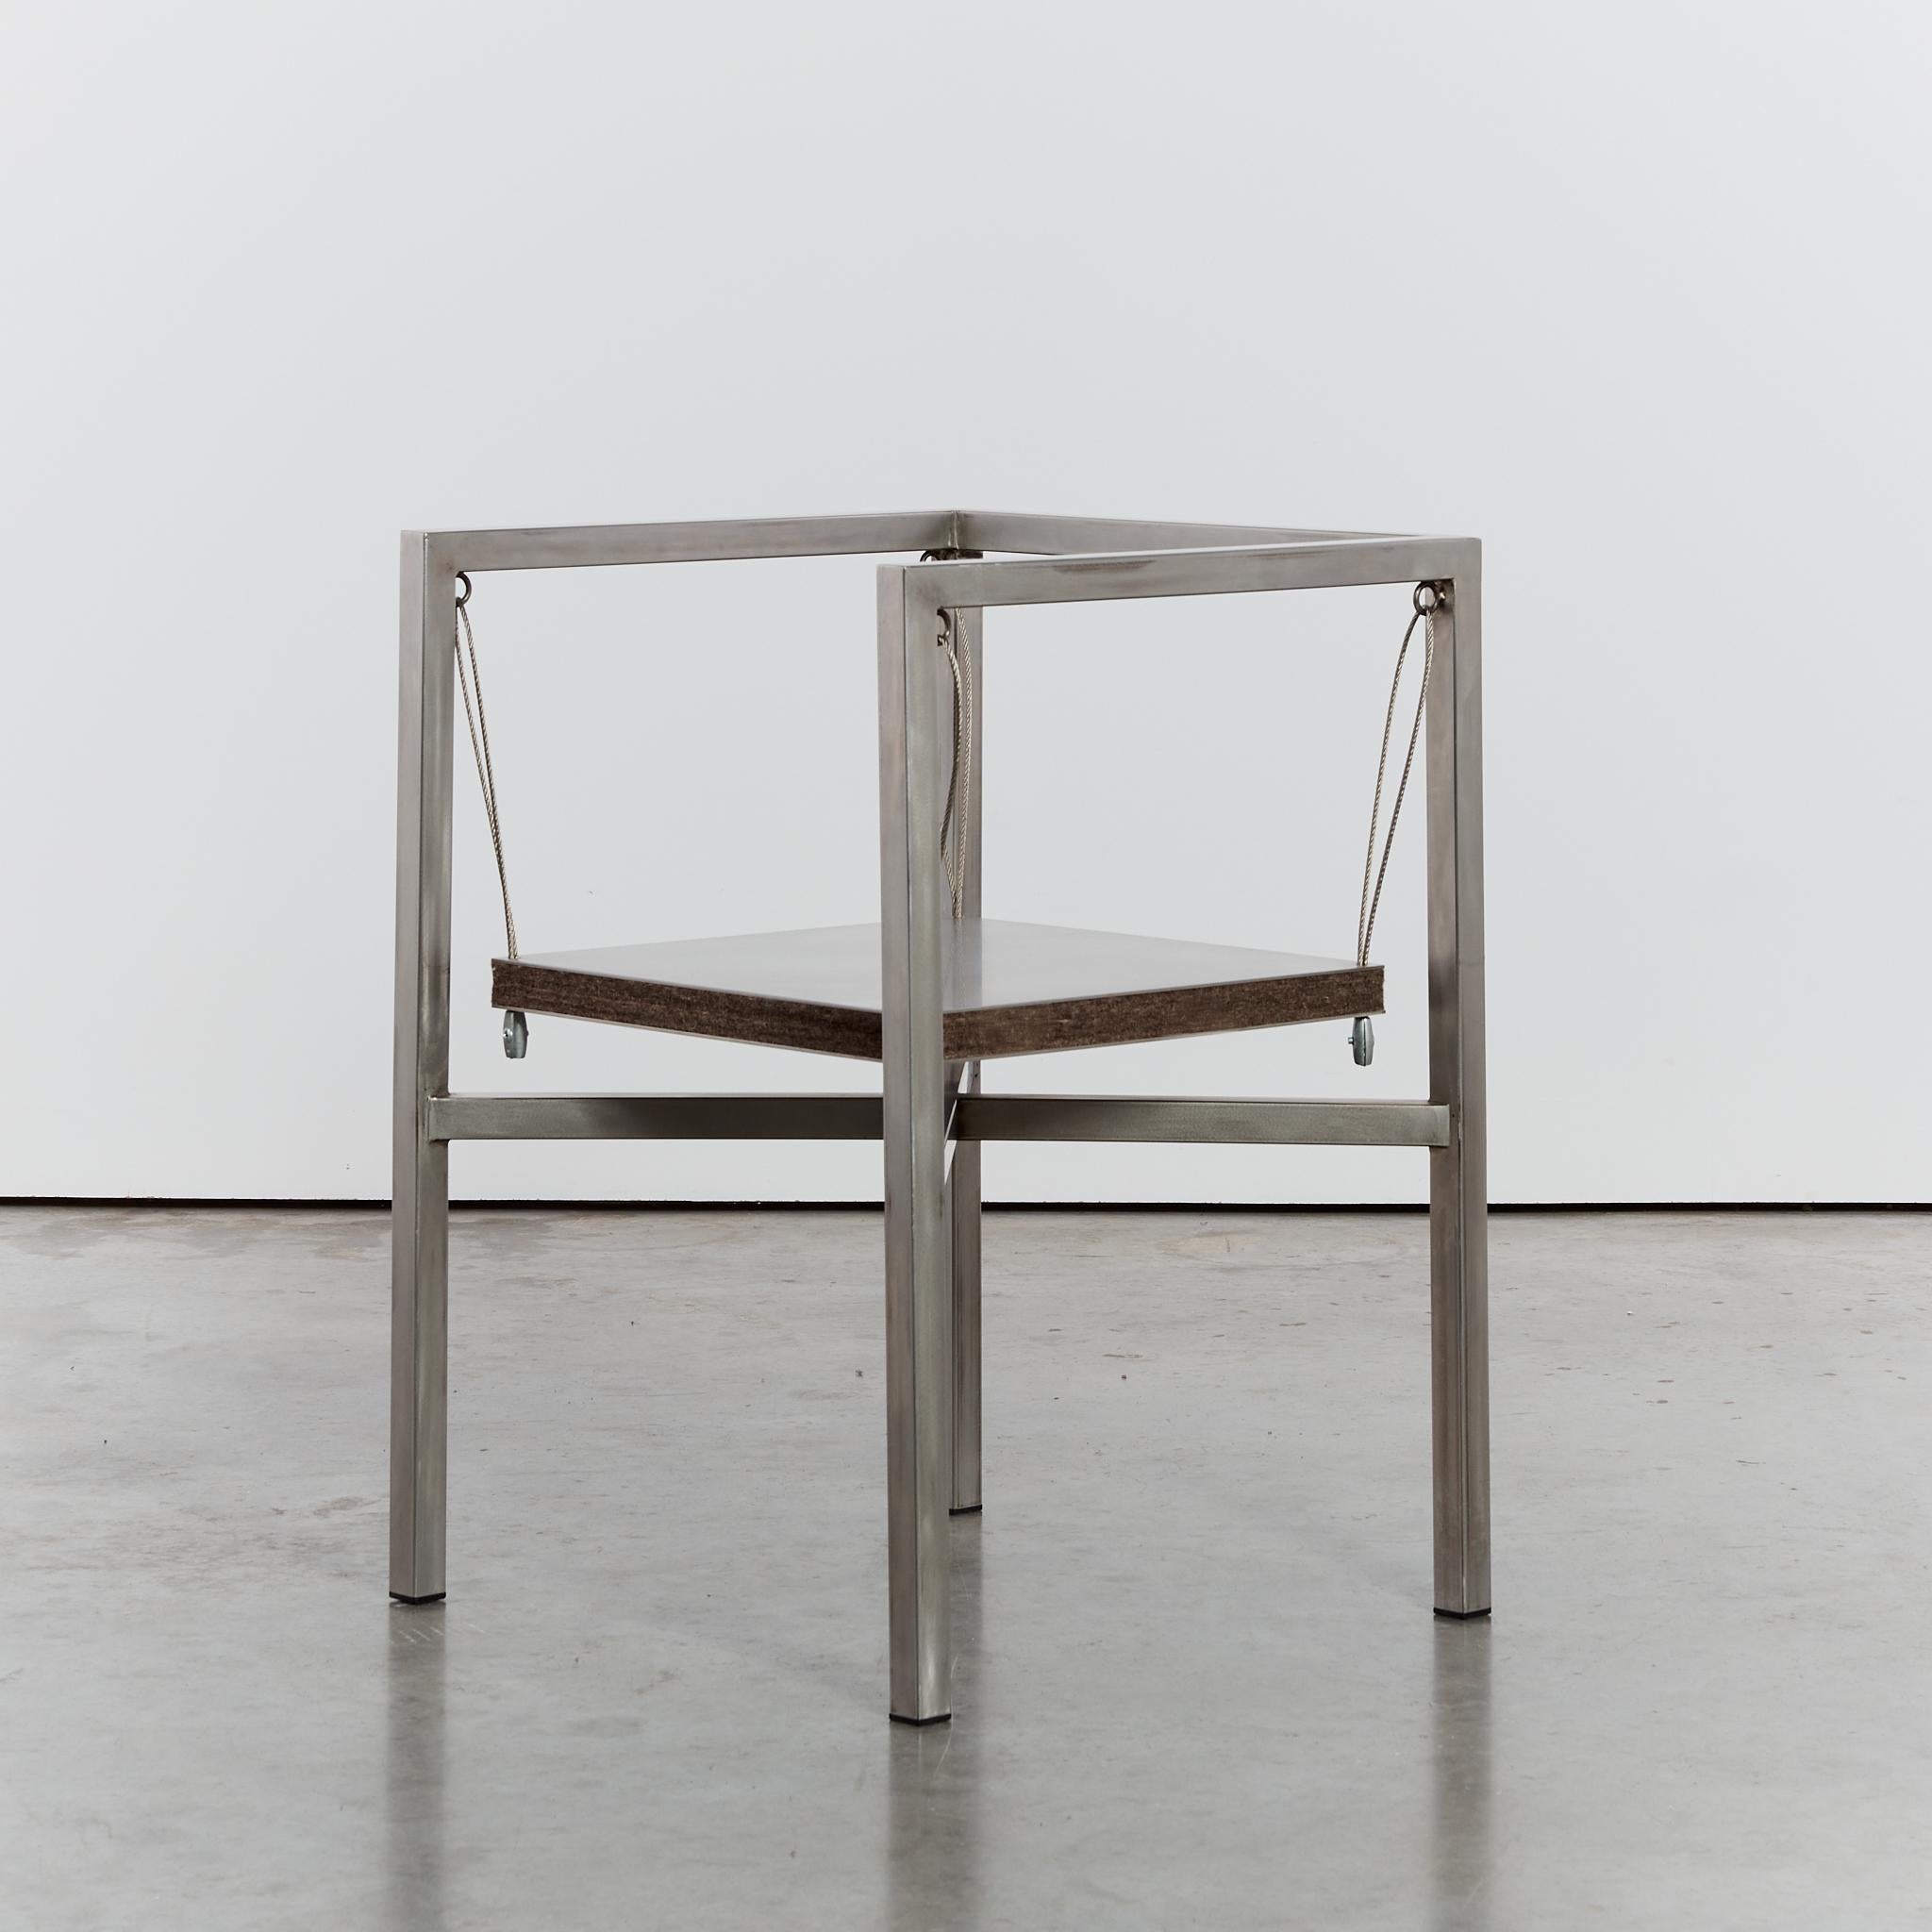 Postmodern steel Sensilla chair by Christoph Siebrasse signed In Good Condition For Sale In London, GB